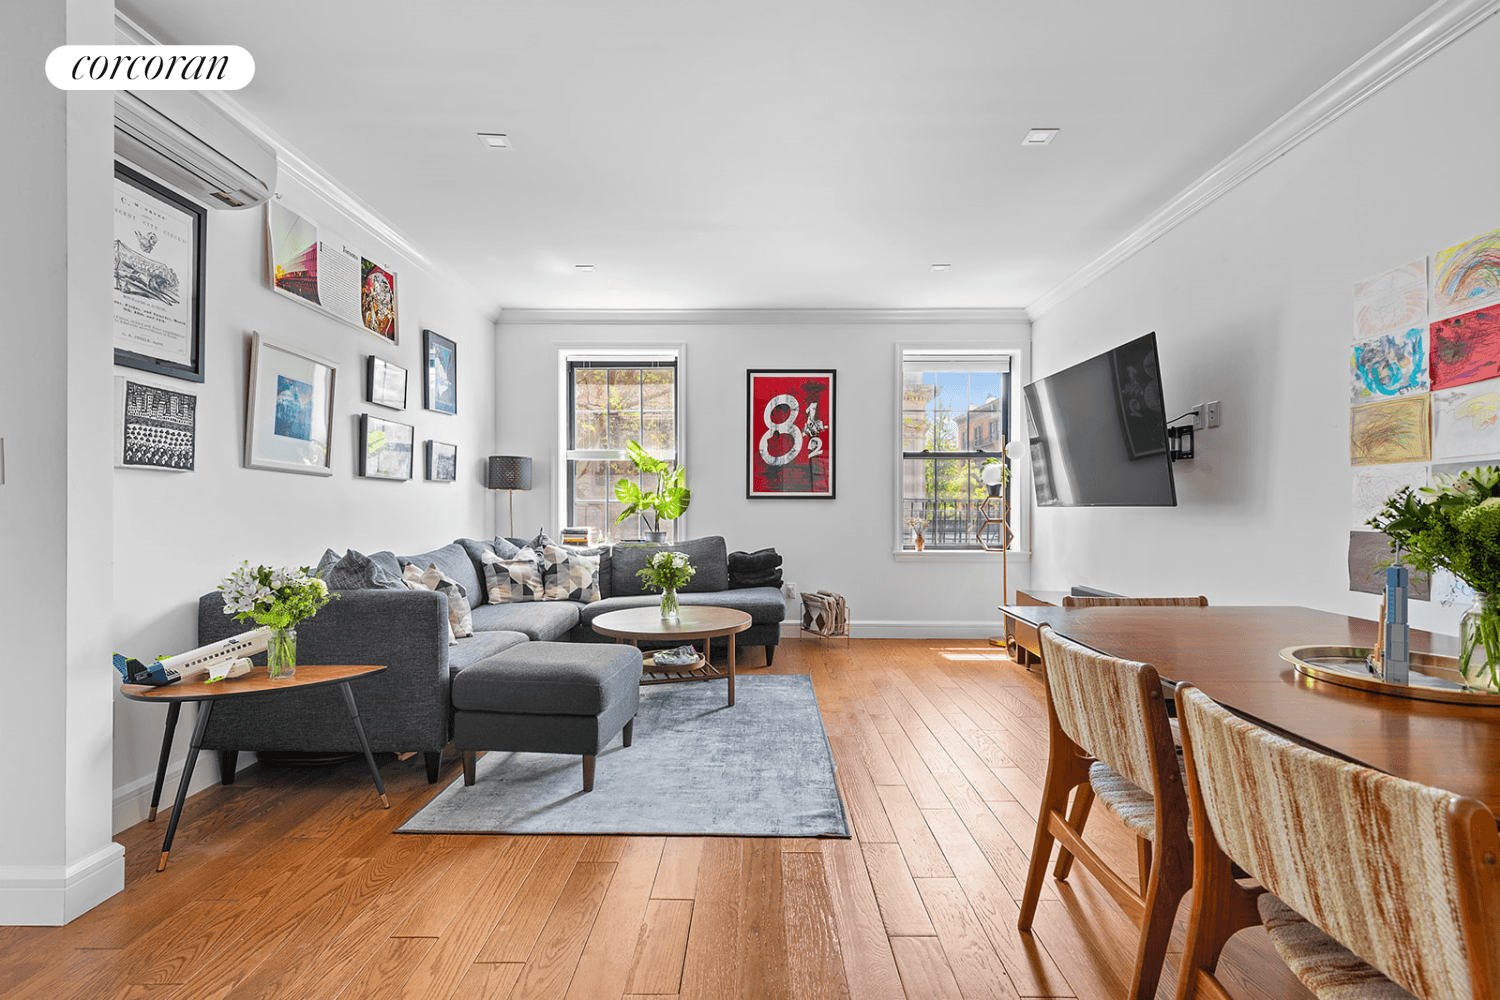 205 Hicks Street, 2A, Brooklyn, New York 11201New to the market Make this gorgeous, sophisticated three bedroom, one bath co op rental your new home !